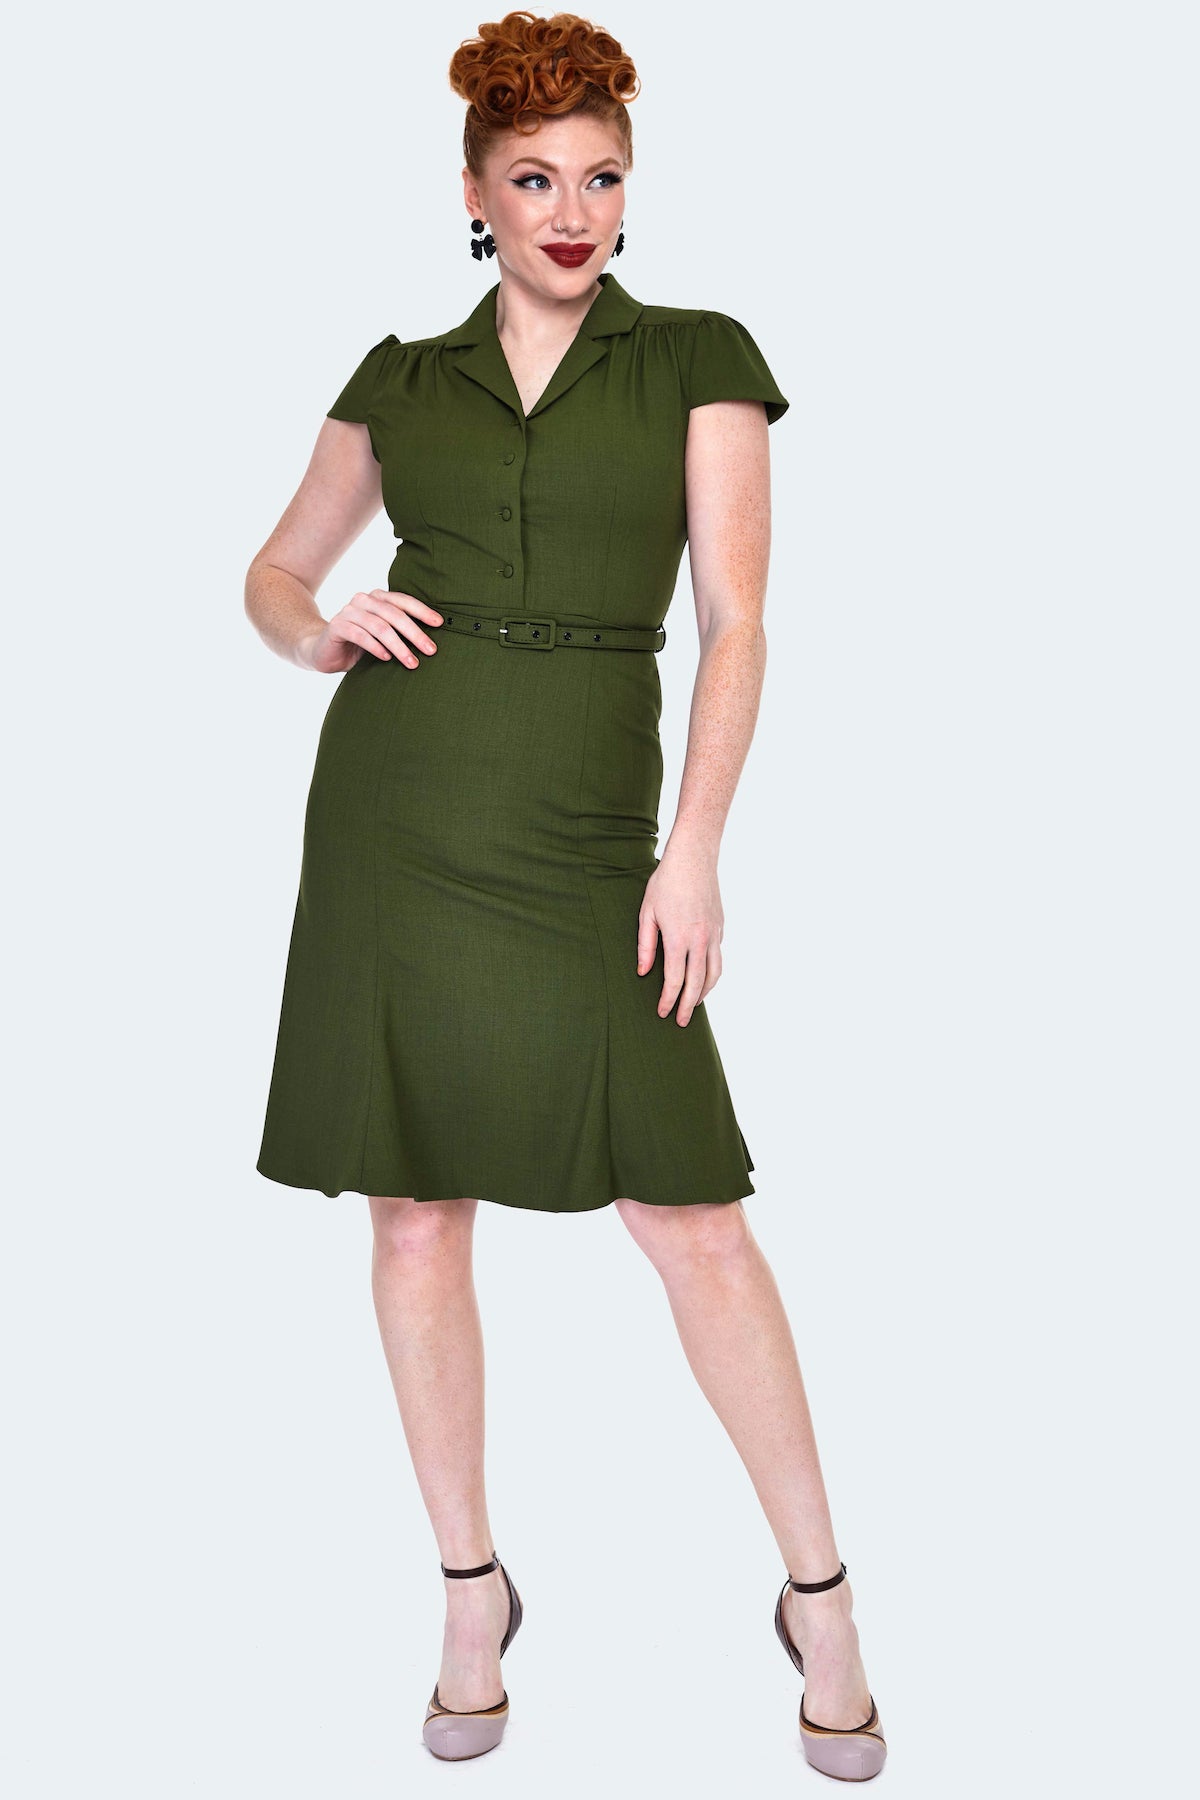 A model wearing a dark olive green shirtwaist dress with a v-neck and notched collar. It has gathering at the shoulders and slightly puffed cap sleeves. Hitting at the natural waist with a self belt and ends just above the knee with a slight flare. Seen from the front